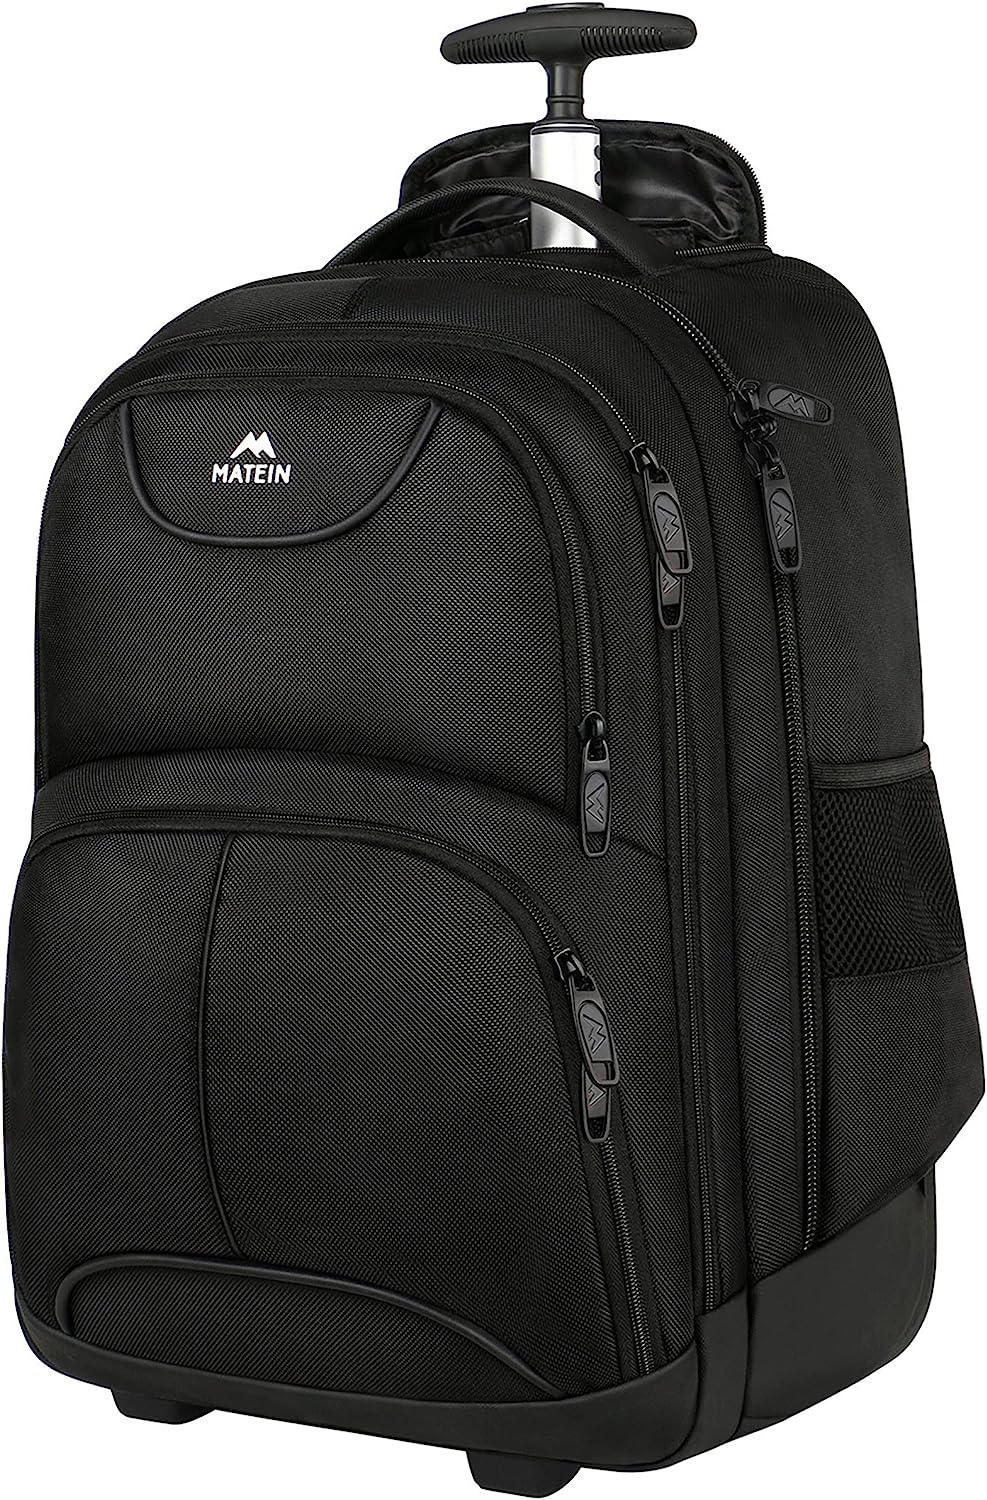 Rolling Backpack, MATEIN 17 inch Water Resistant [...]